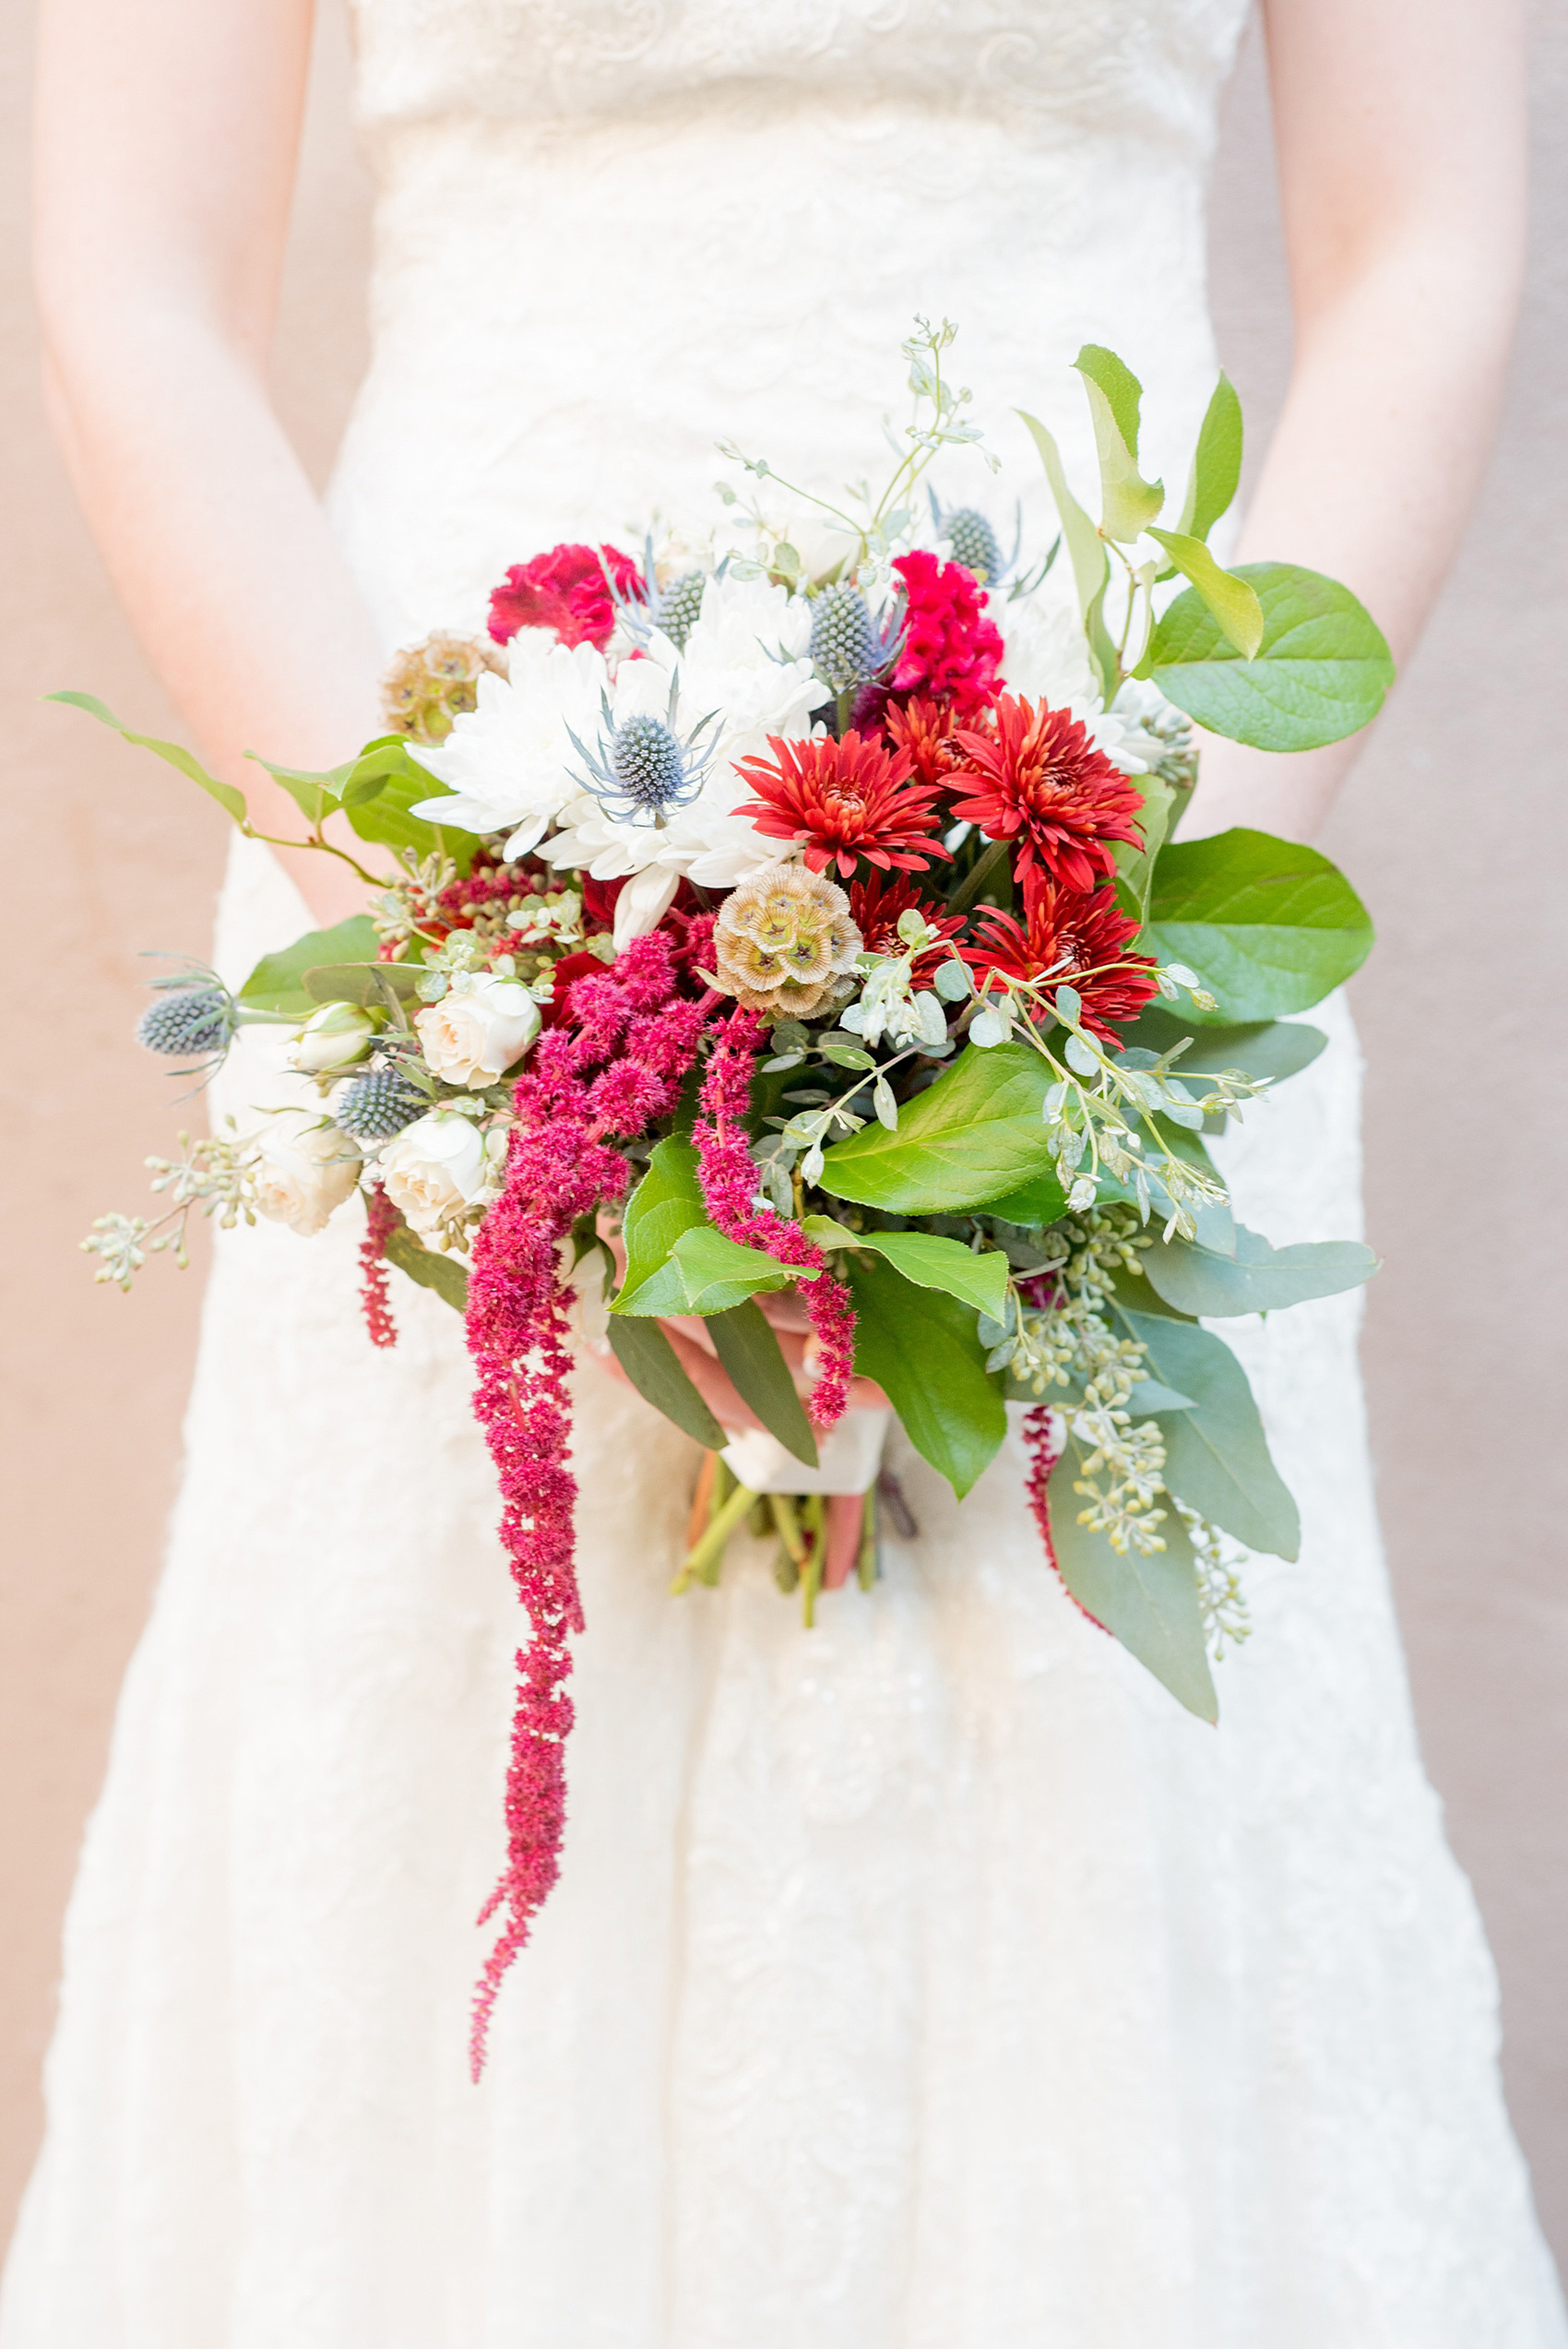 Mikkel Paige Photography photos of a fall wedding bouquet for a downtown Raleigh wedding at 214 Martin Street.